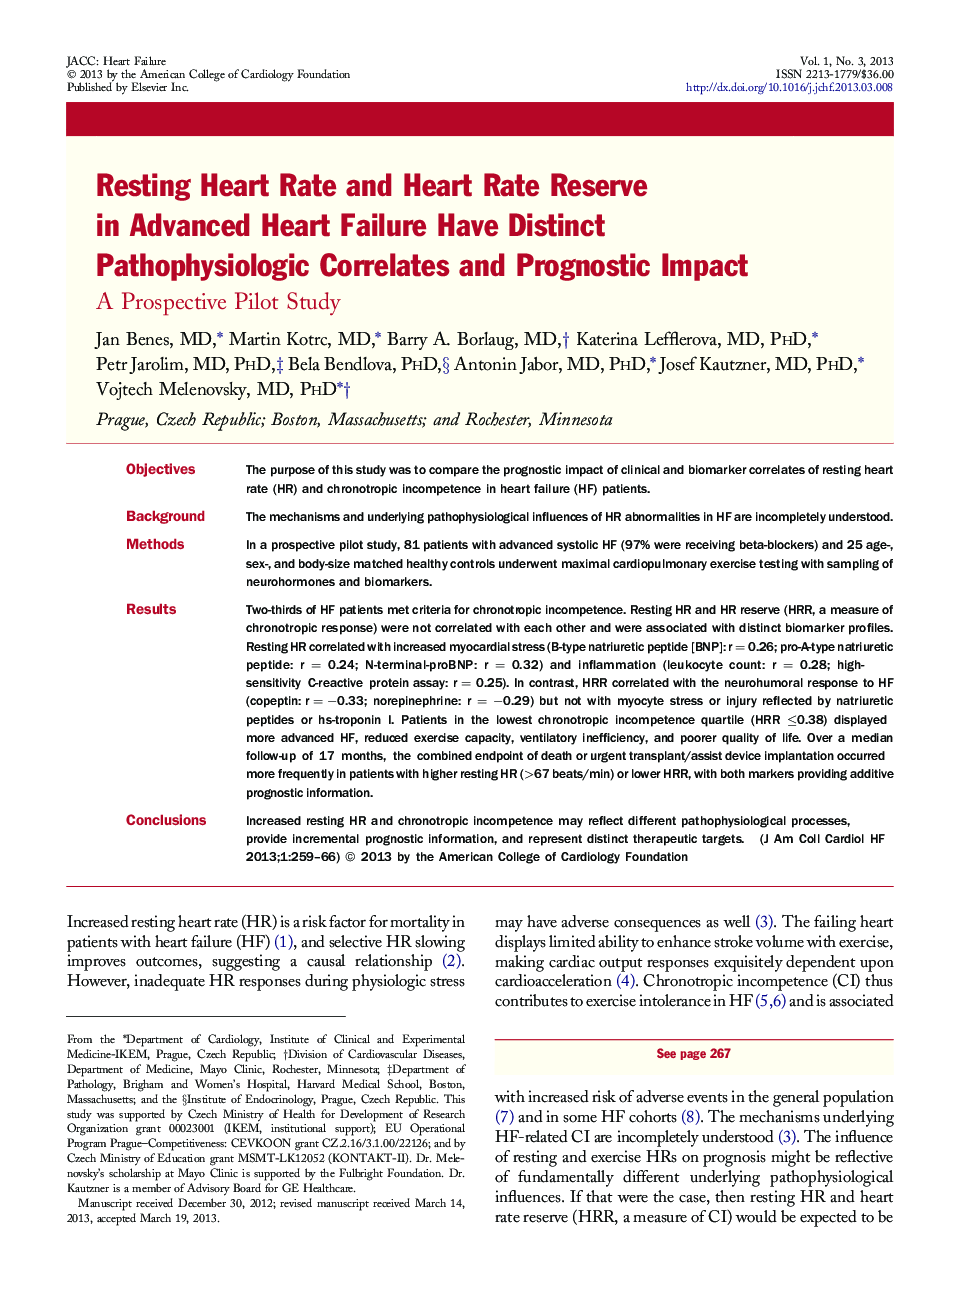 Resting Heart Rate and Heart Rate Reserve in Advanced Heart Failure Have Distinct Pathophysiologic Correlates and Prognostic Impact : A Prospective Pilot Study